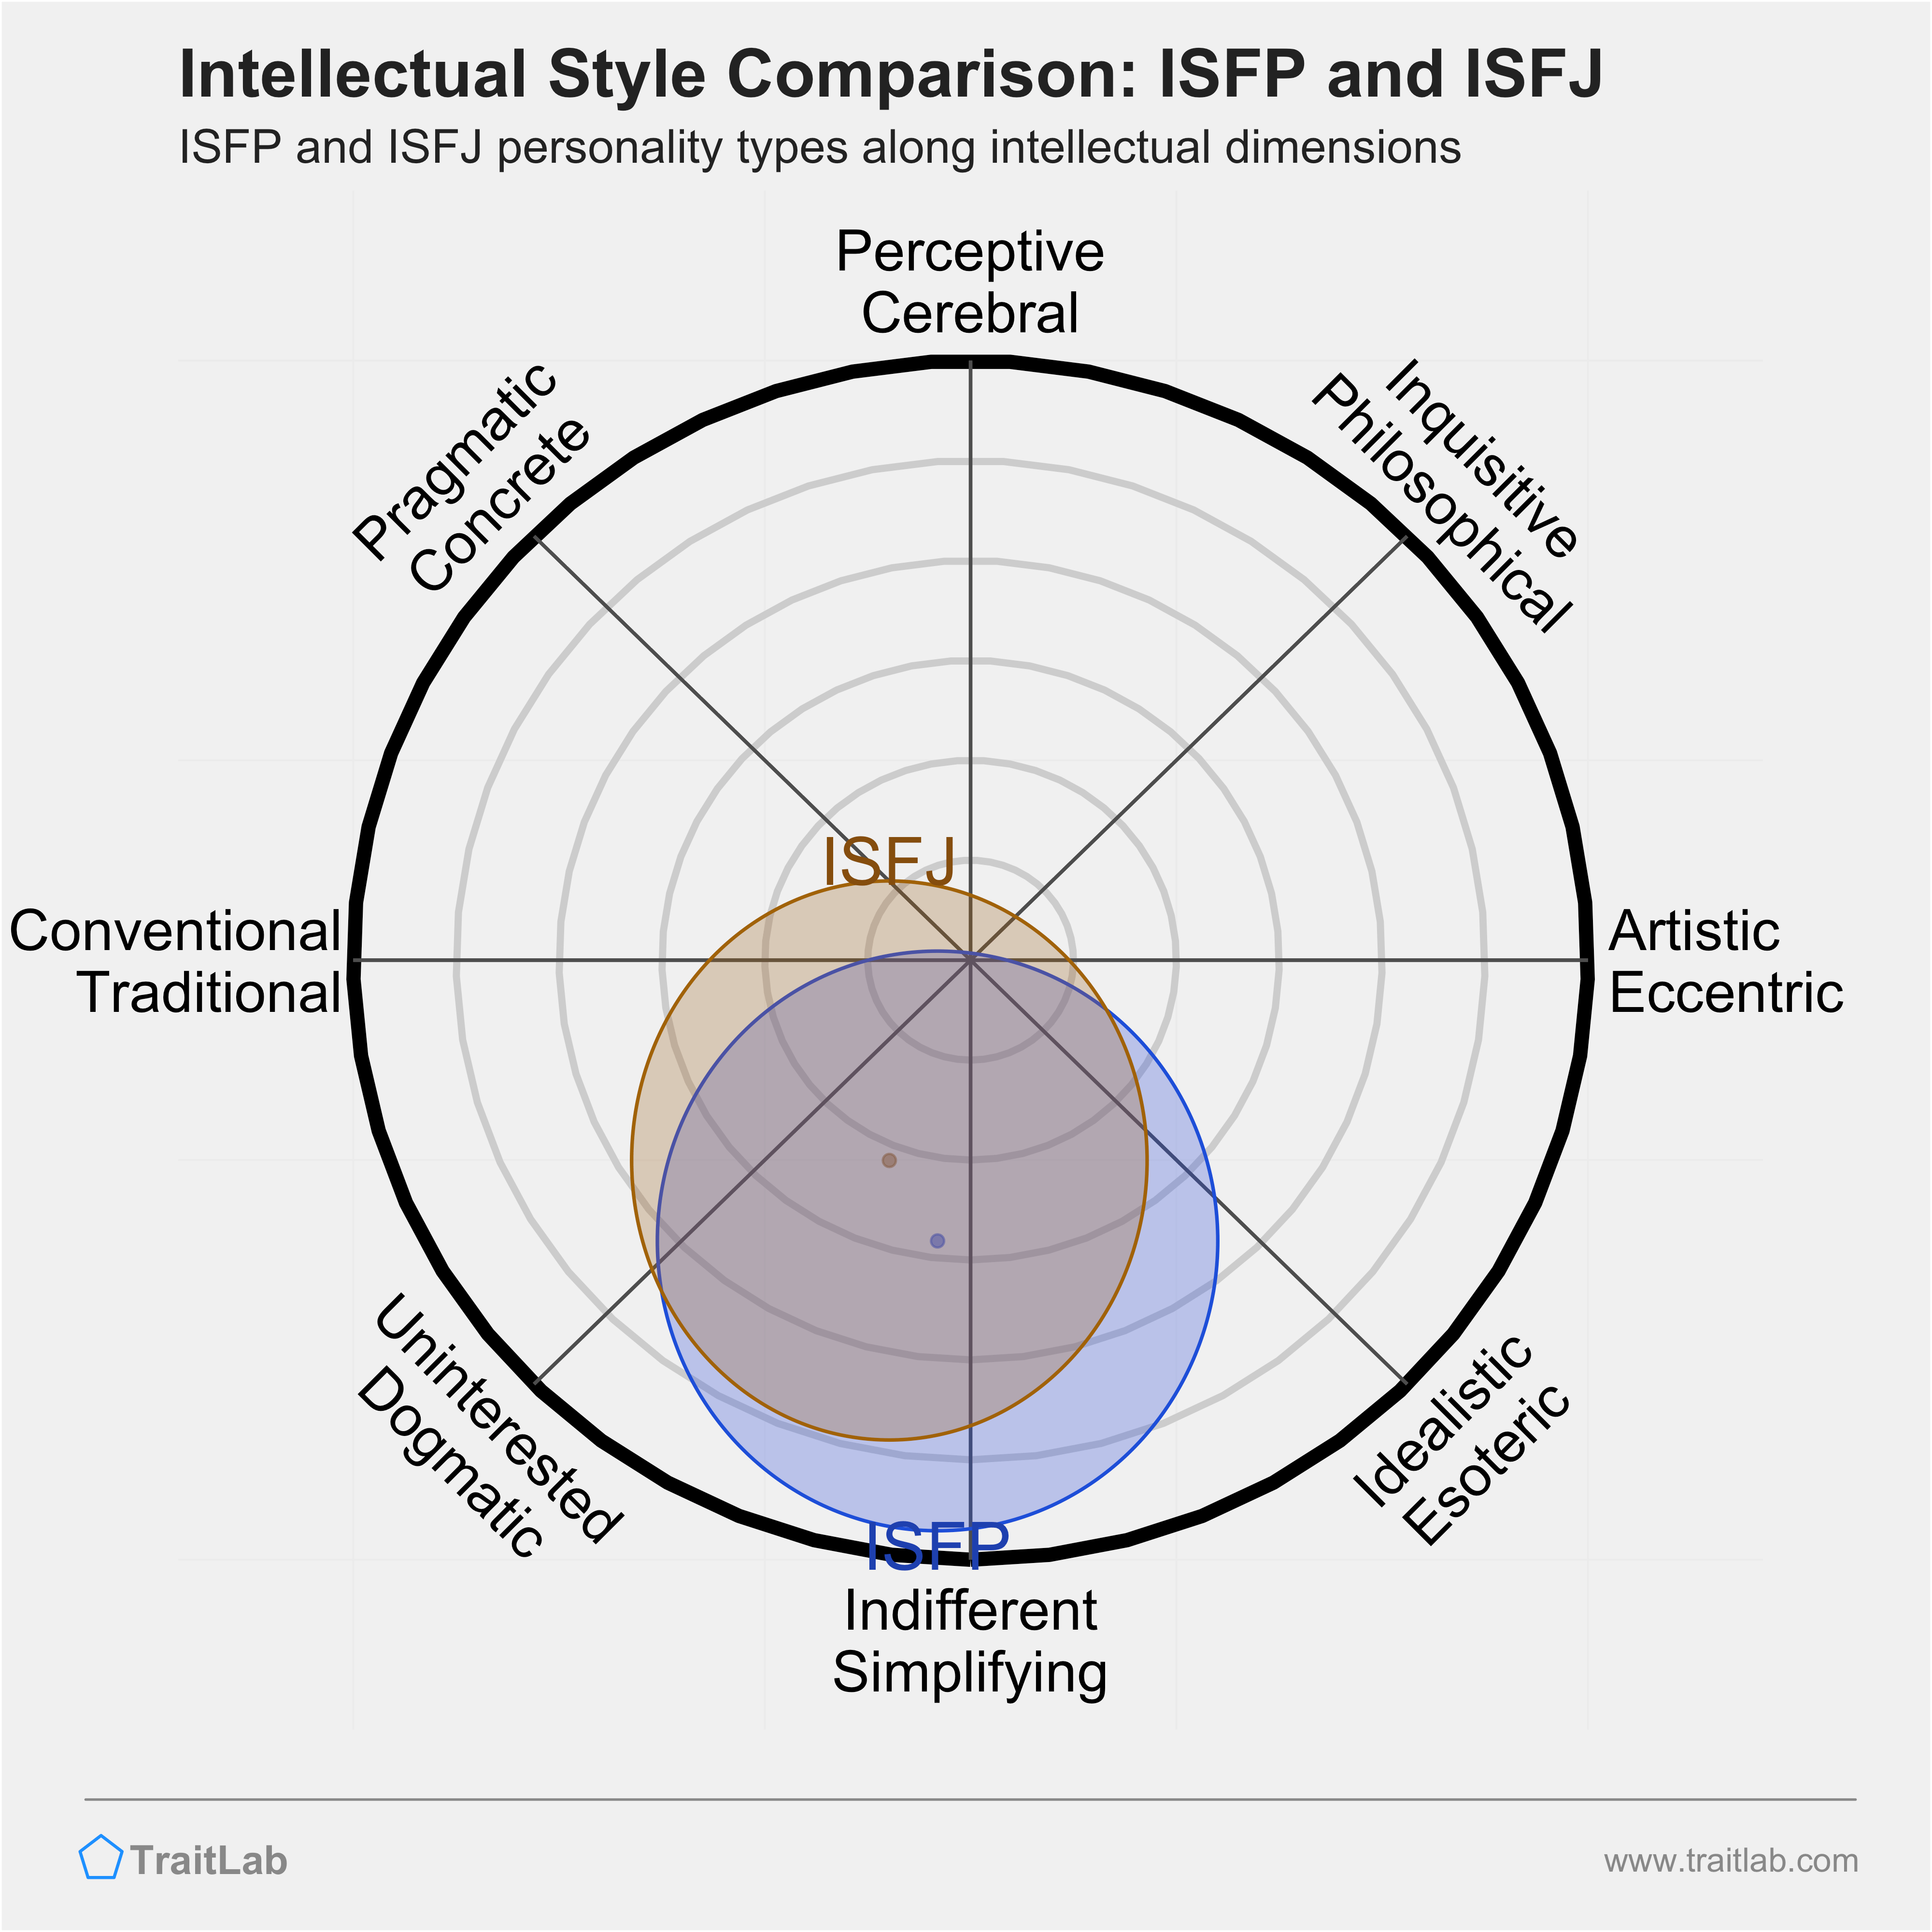 ISFP and ISFJ comparison across intellectual dimensions